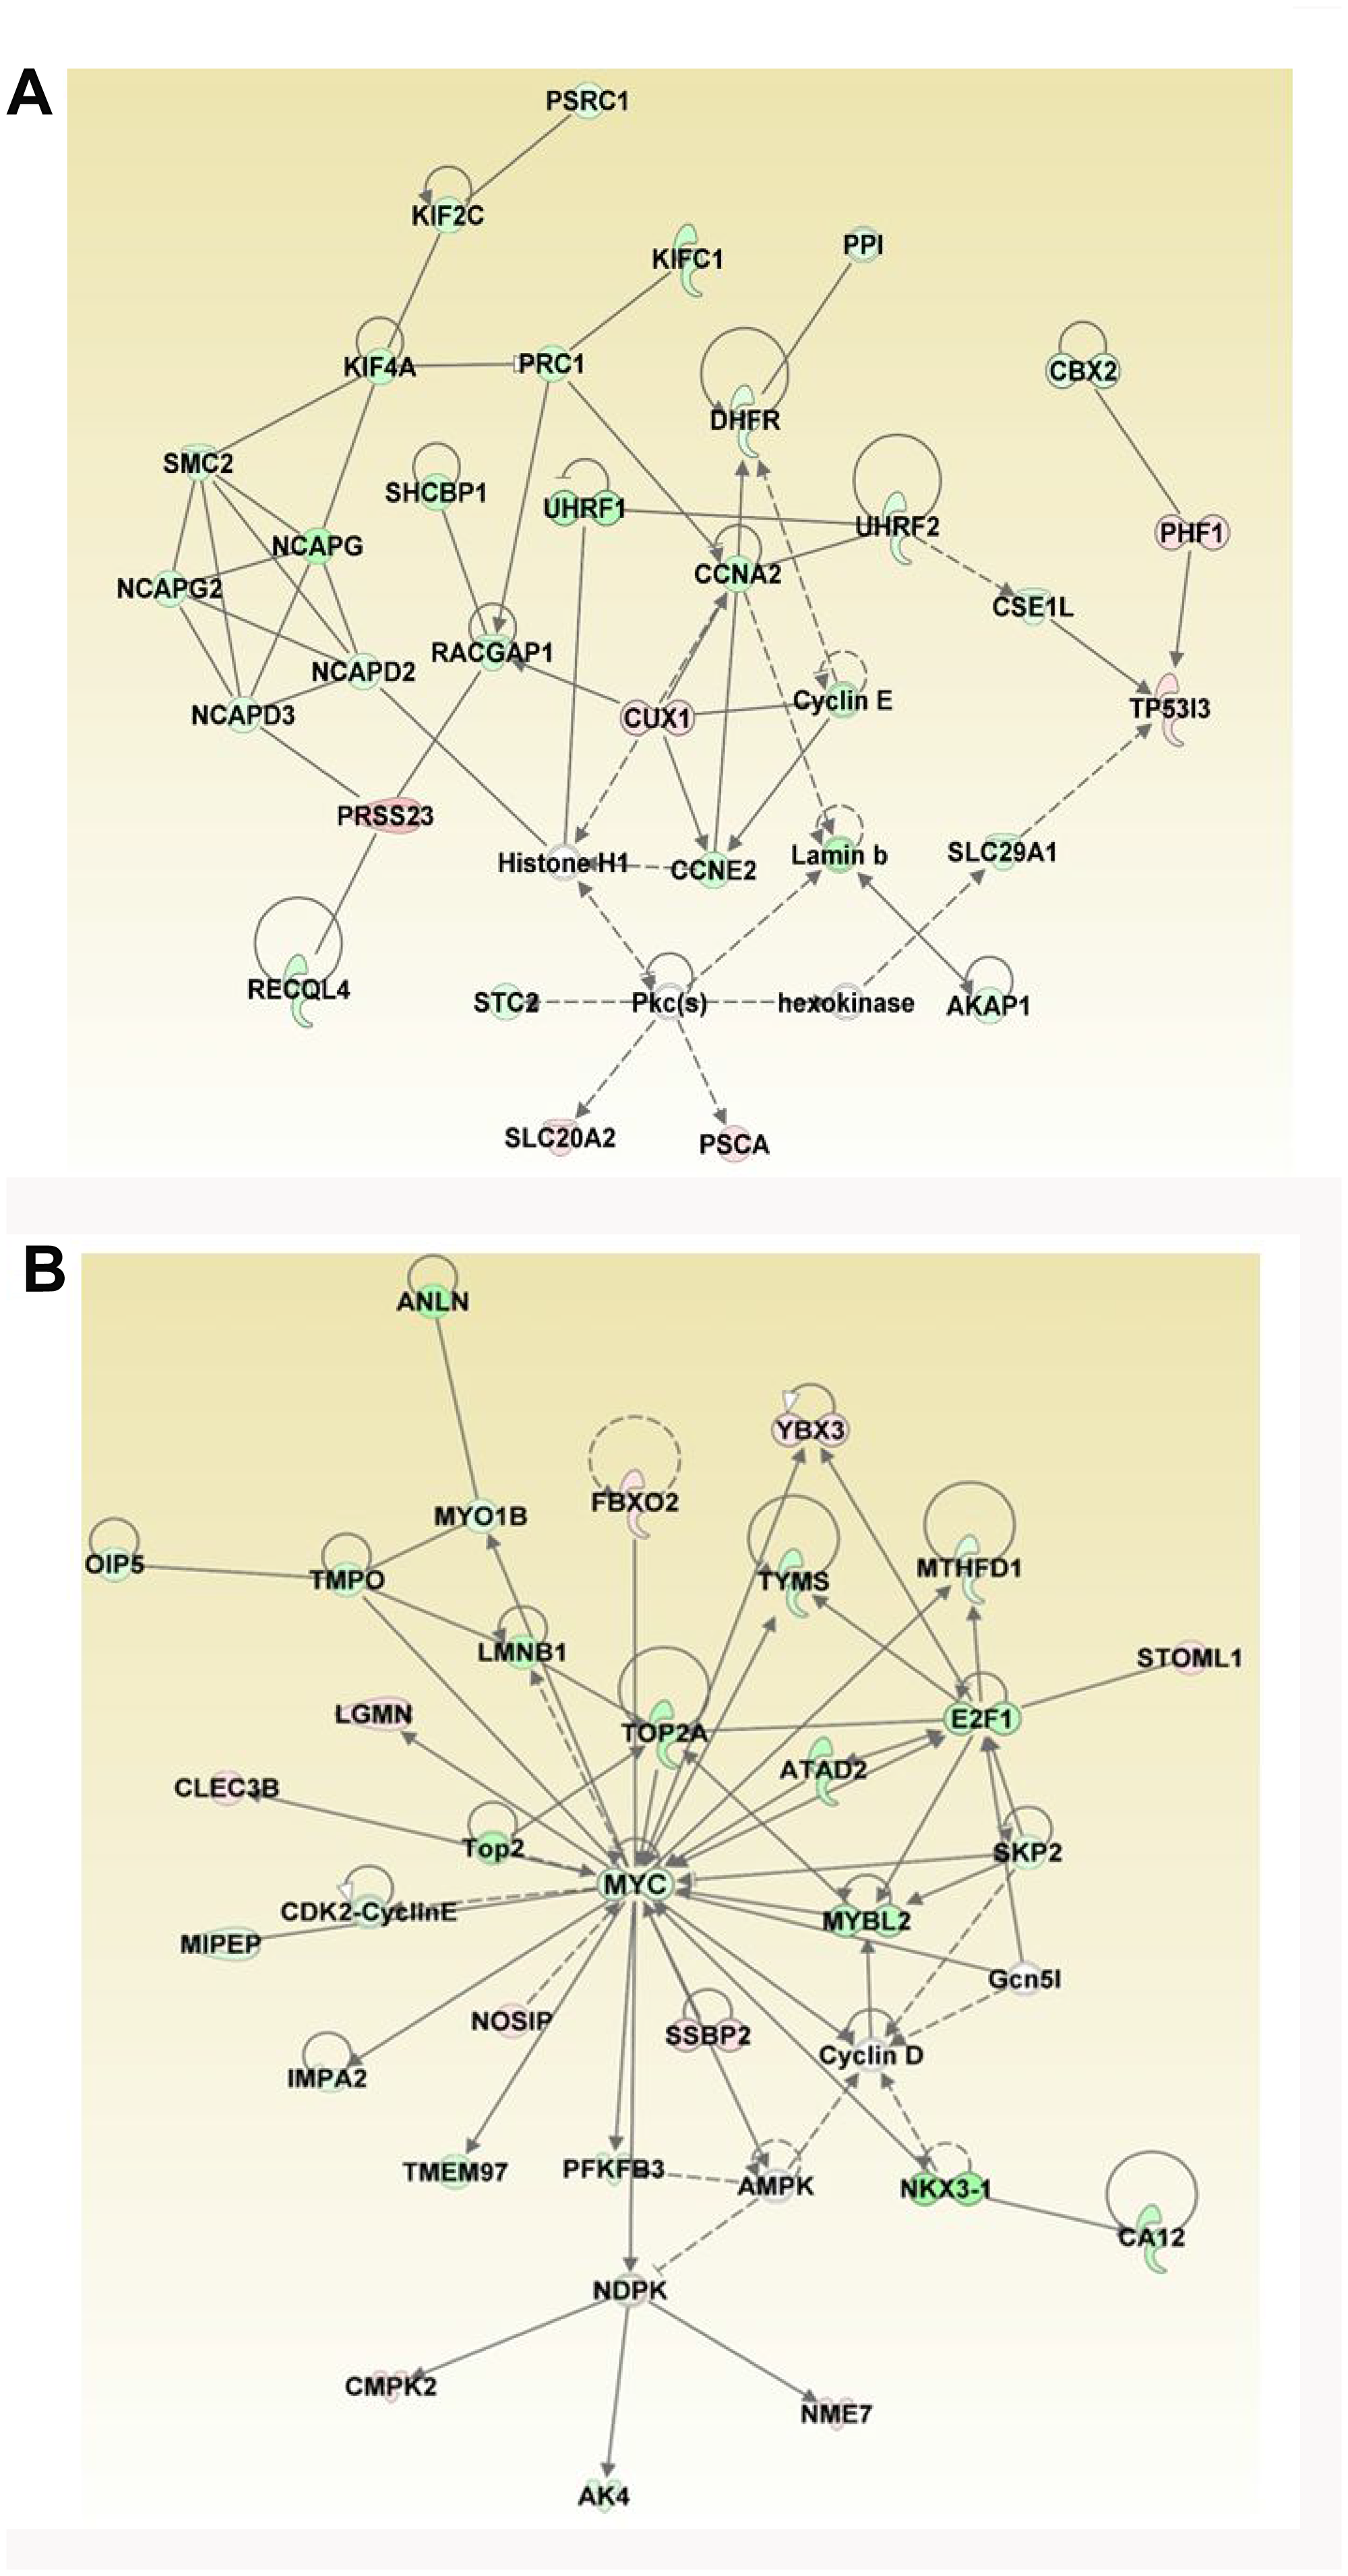 Analyses of ERG-associated networks.